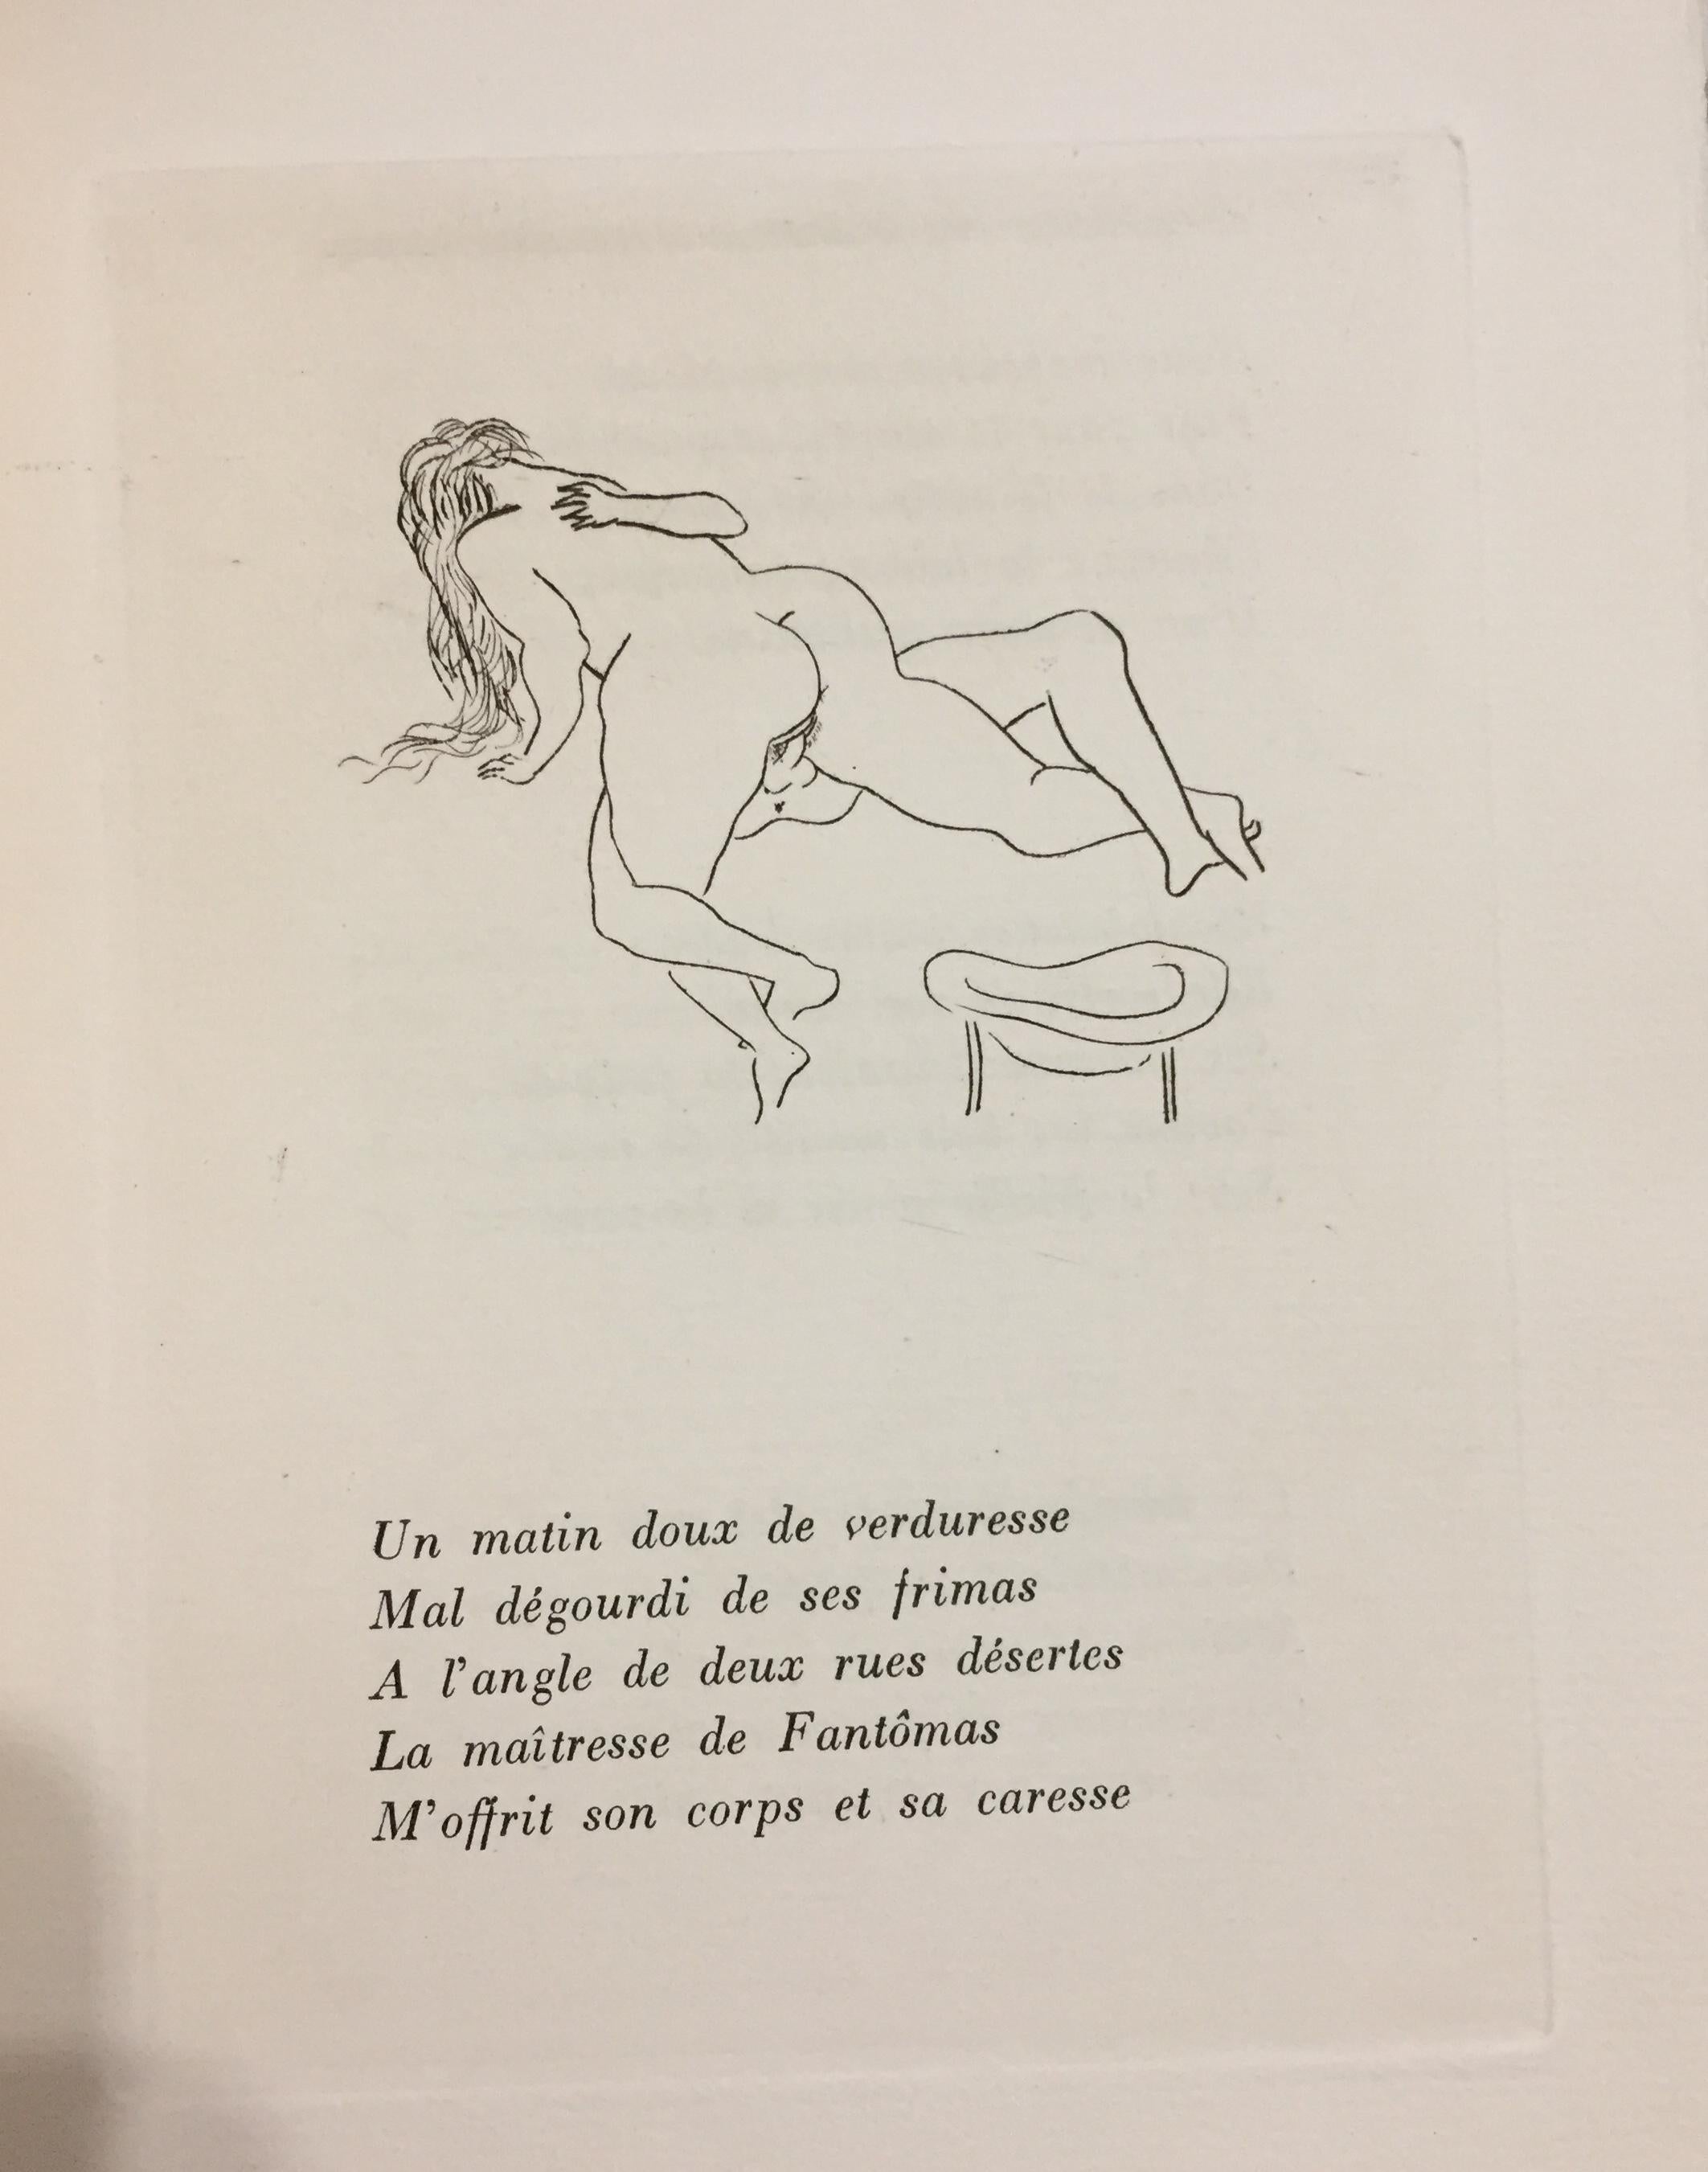 Le Verger des Amours - Rare Book Illustrated by L.T. Foujita - 1927 For Sale 1